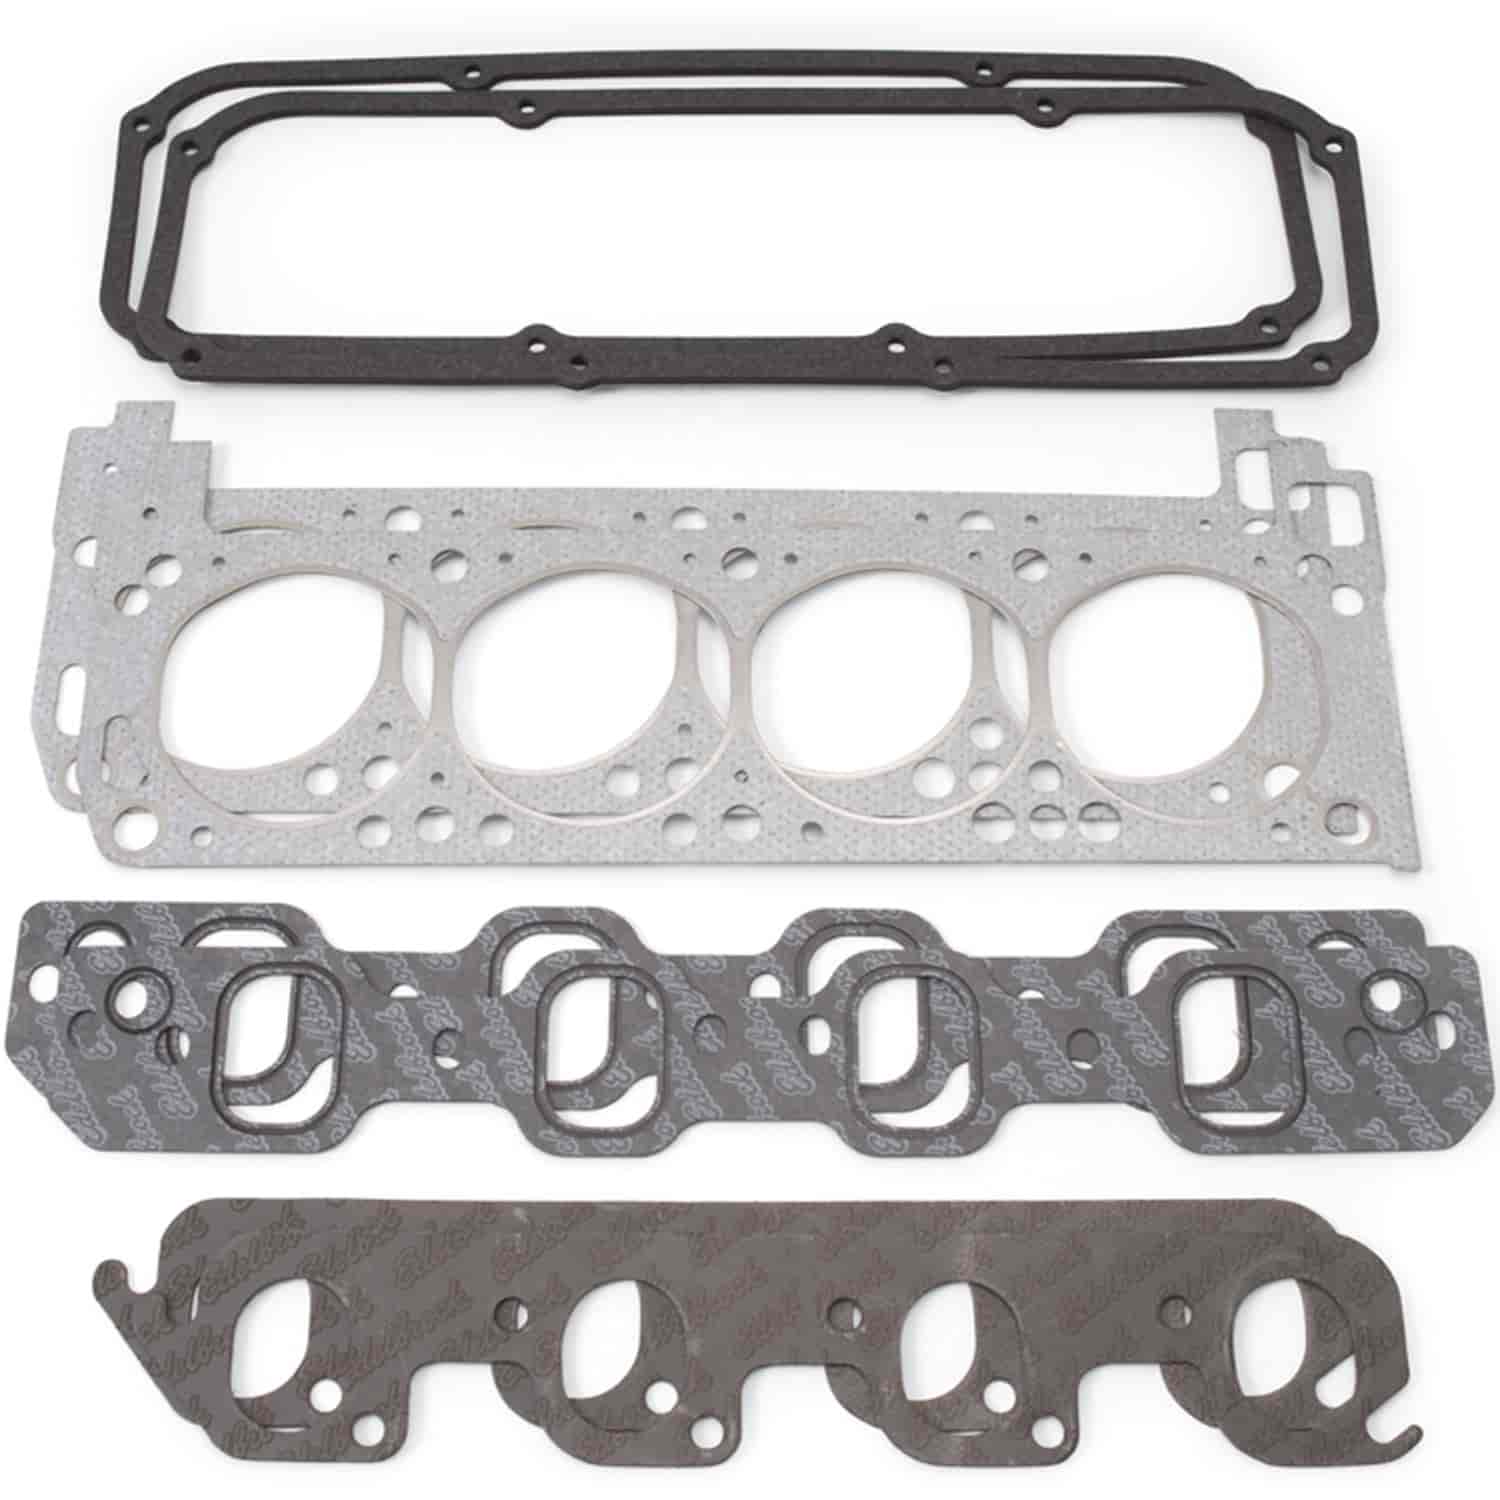 Complete Head Gasket Set for Ford Cleveland 351C/351M/400M